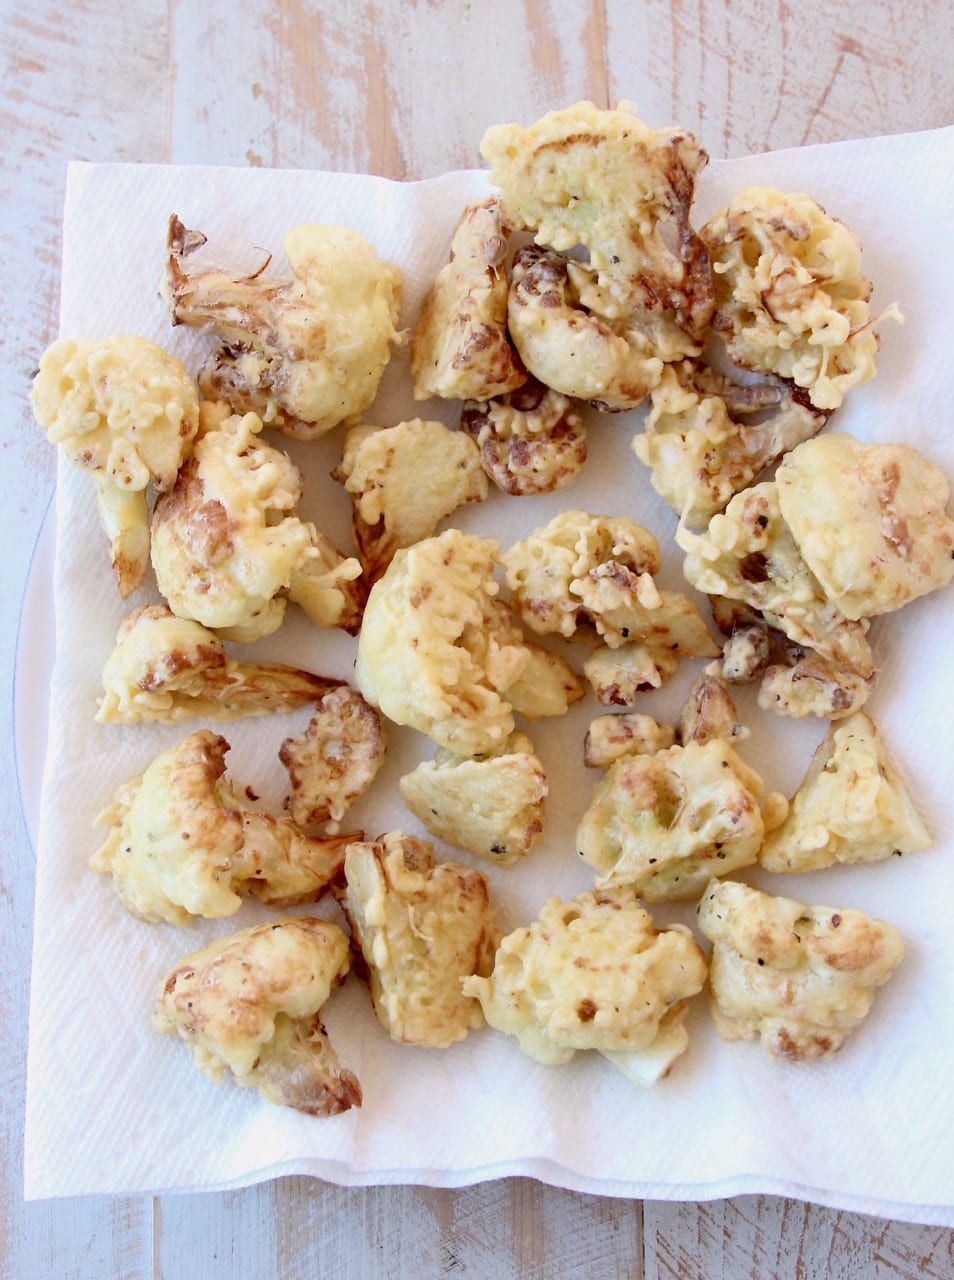 Fried cauliflower pieces on paper towel lined plate